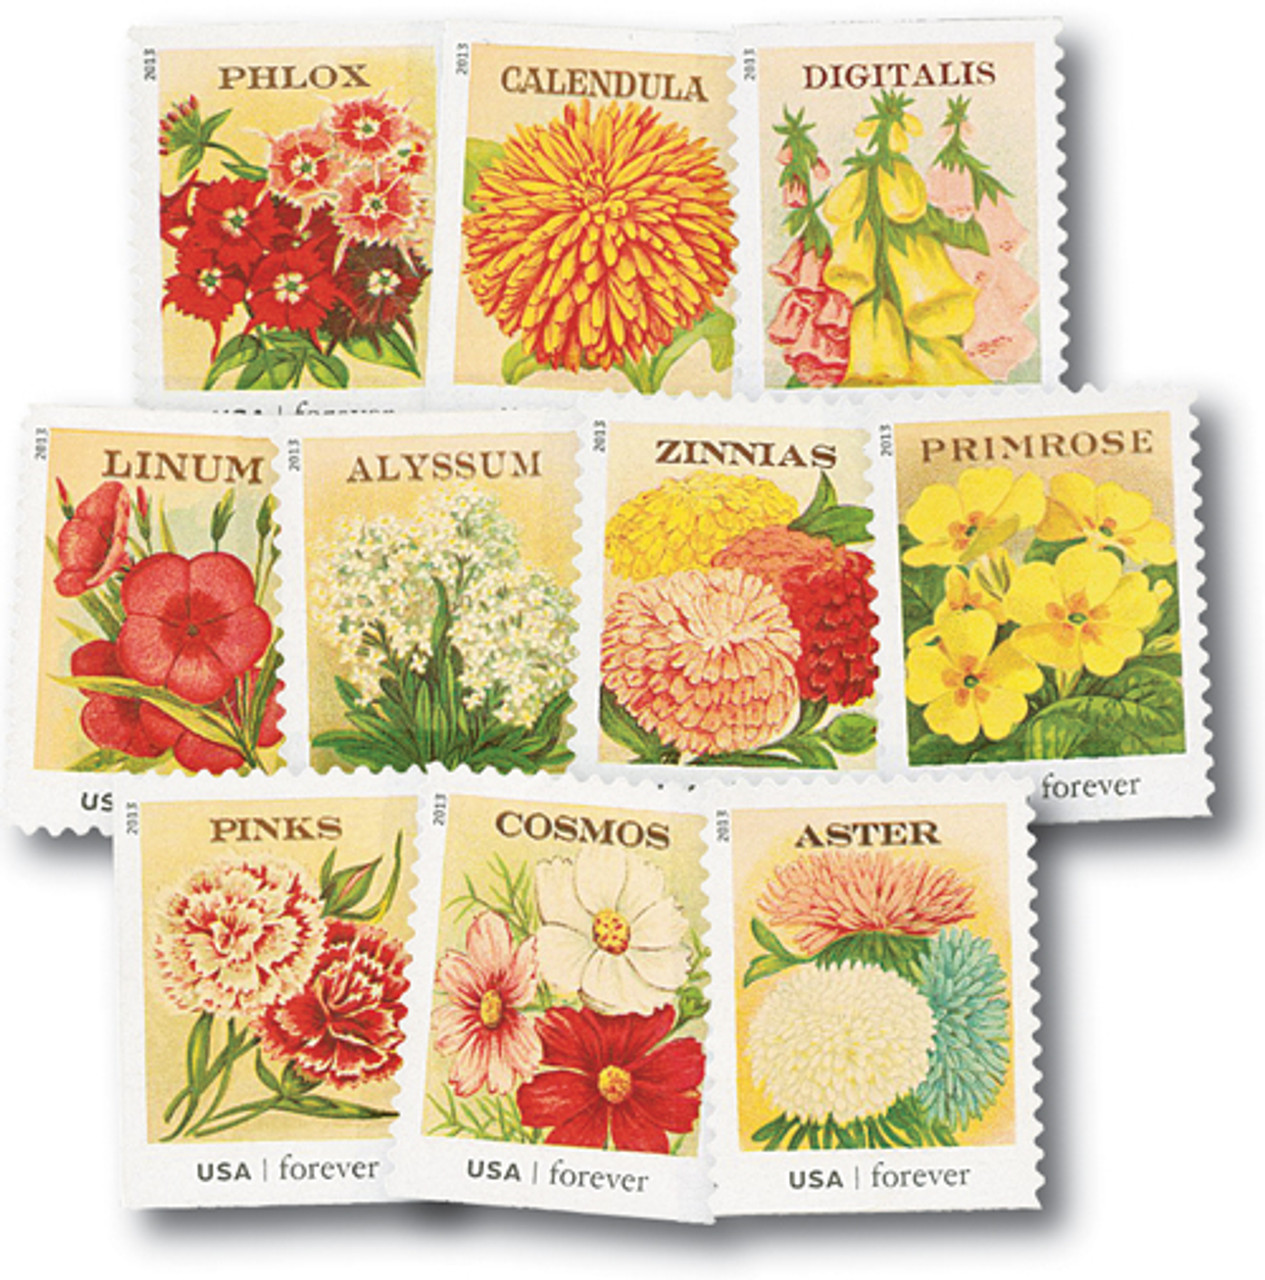 2013 First Class Forever Collection Stamps - Four Seasons Flag: Summer  United States Stamp 1 Roll 100 Sheets - China States Stamps, Forever United  States Stamps